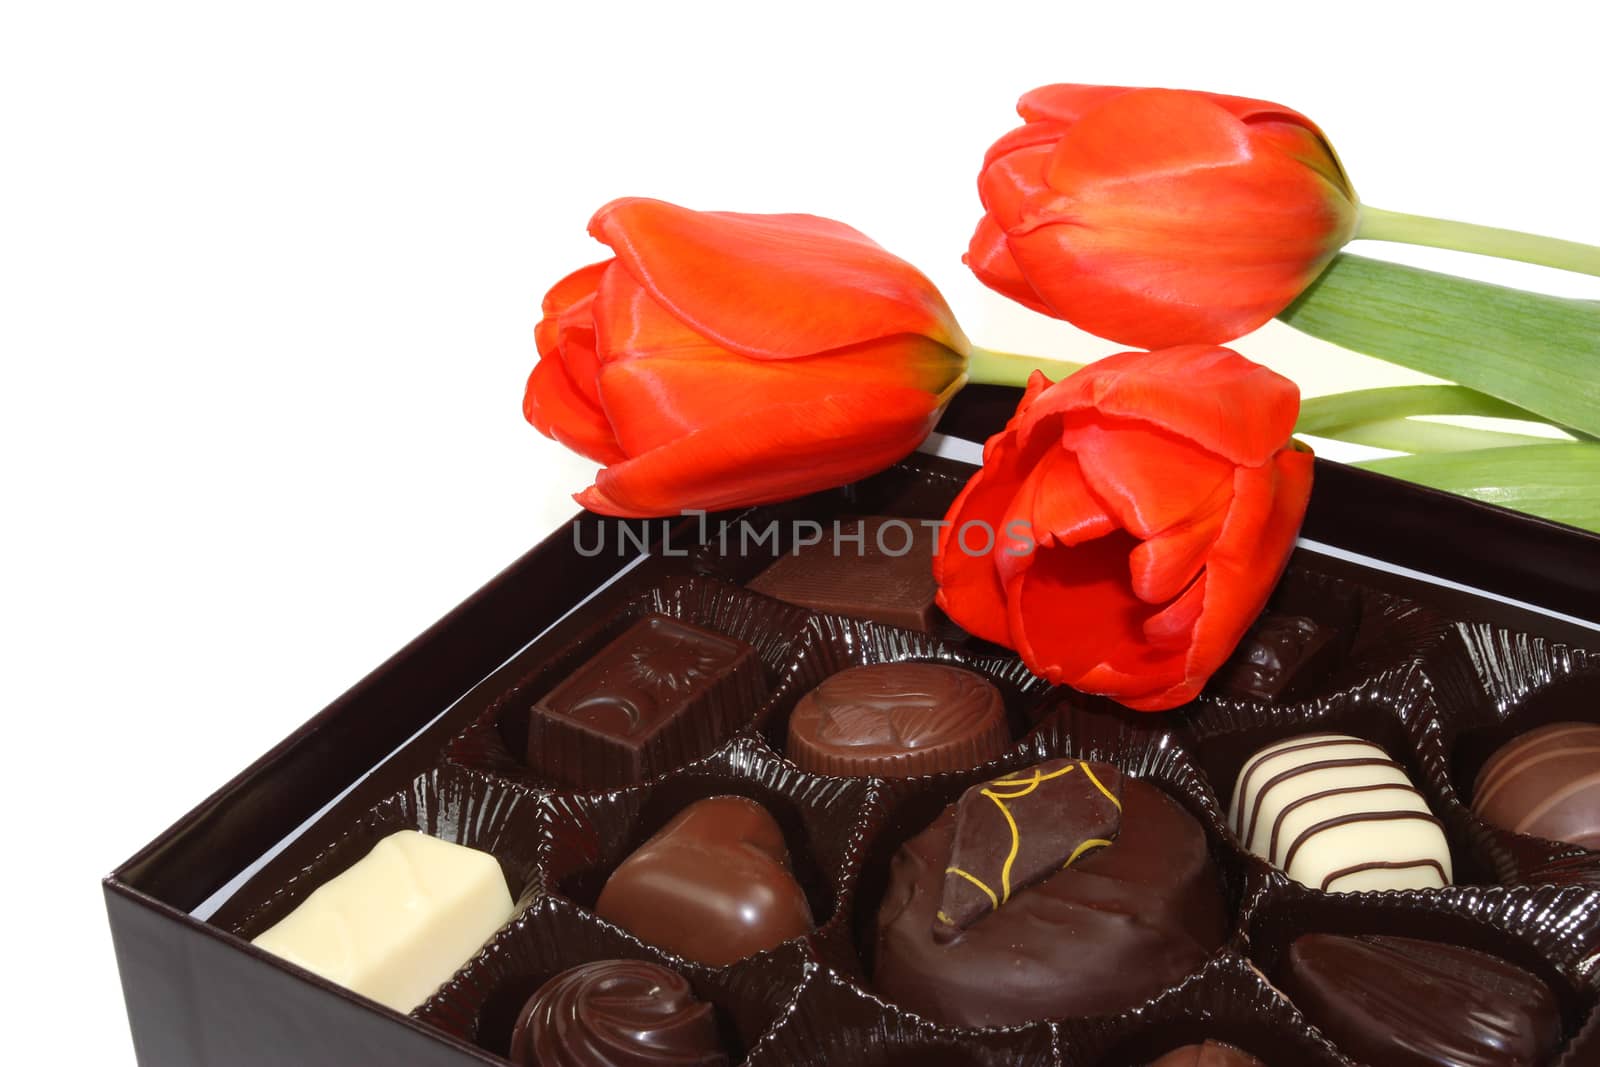 Tulips and Chocolate by ziss